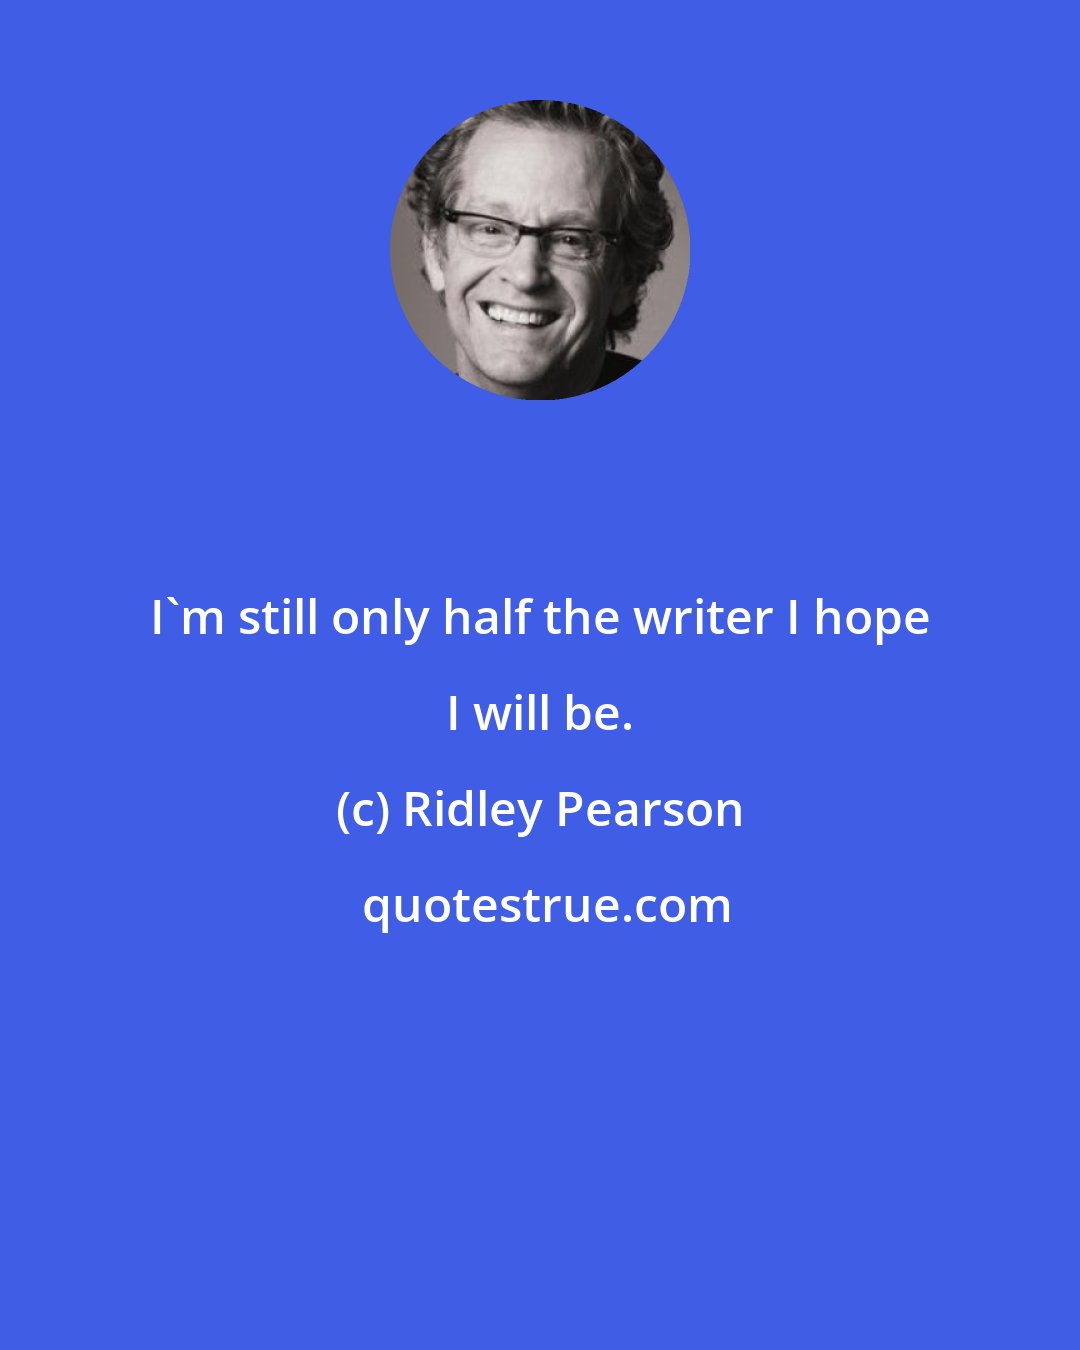 Ridley Pearson: I'm still only half the writer I hope I will be.